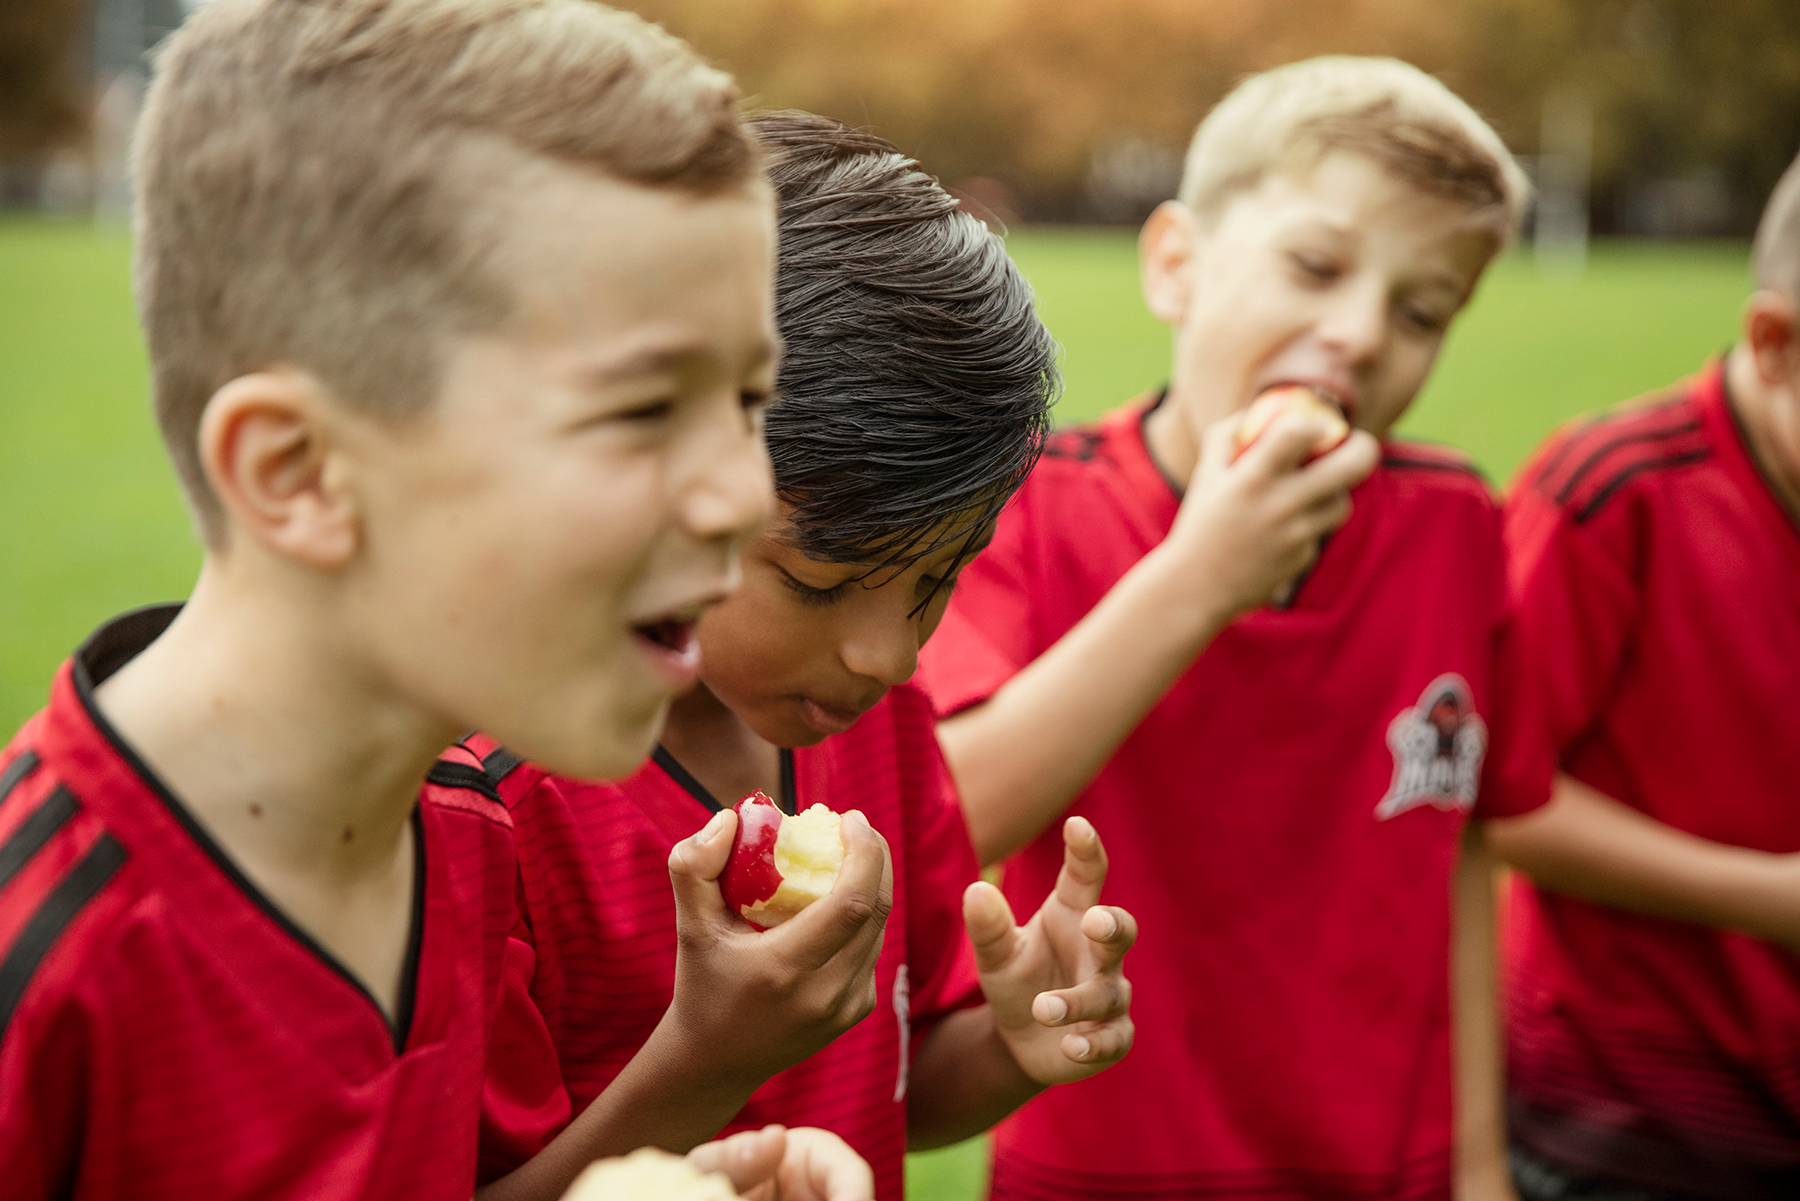 four kids eating apples after football match